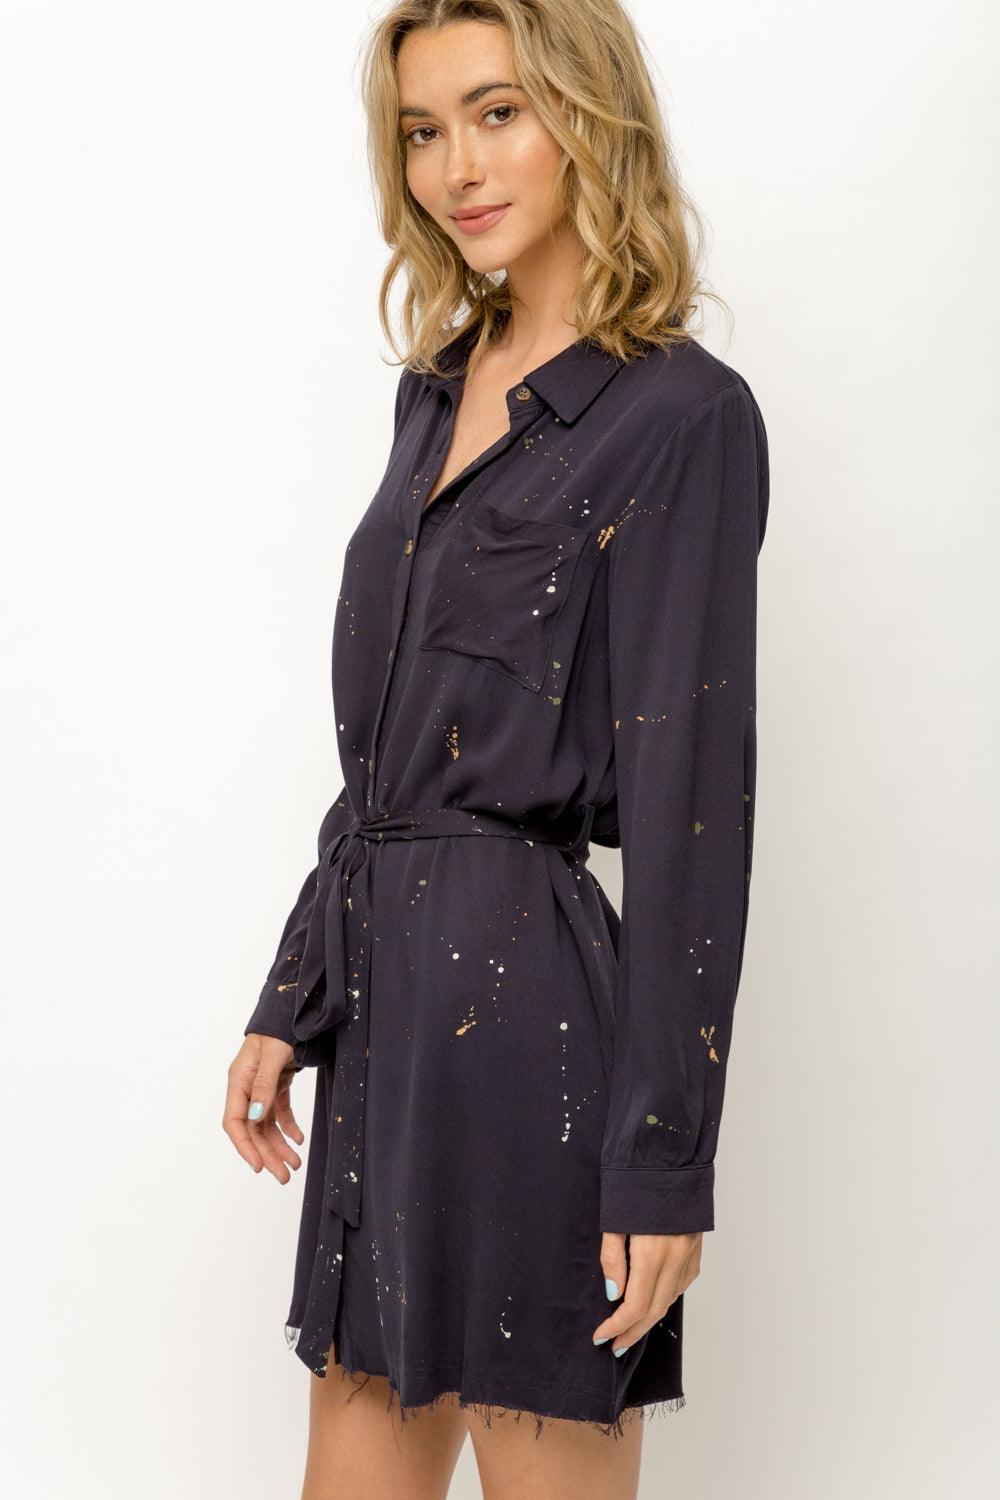 Black Paint Splash Shirt Dress with Fray Detail - Strawberry Moon Boutique